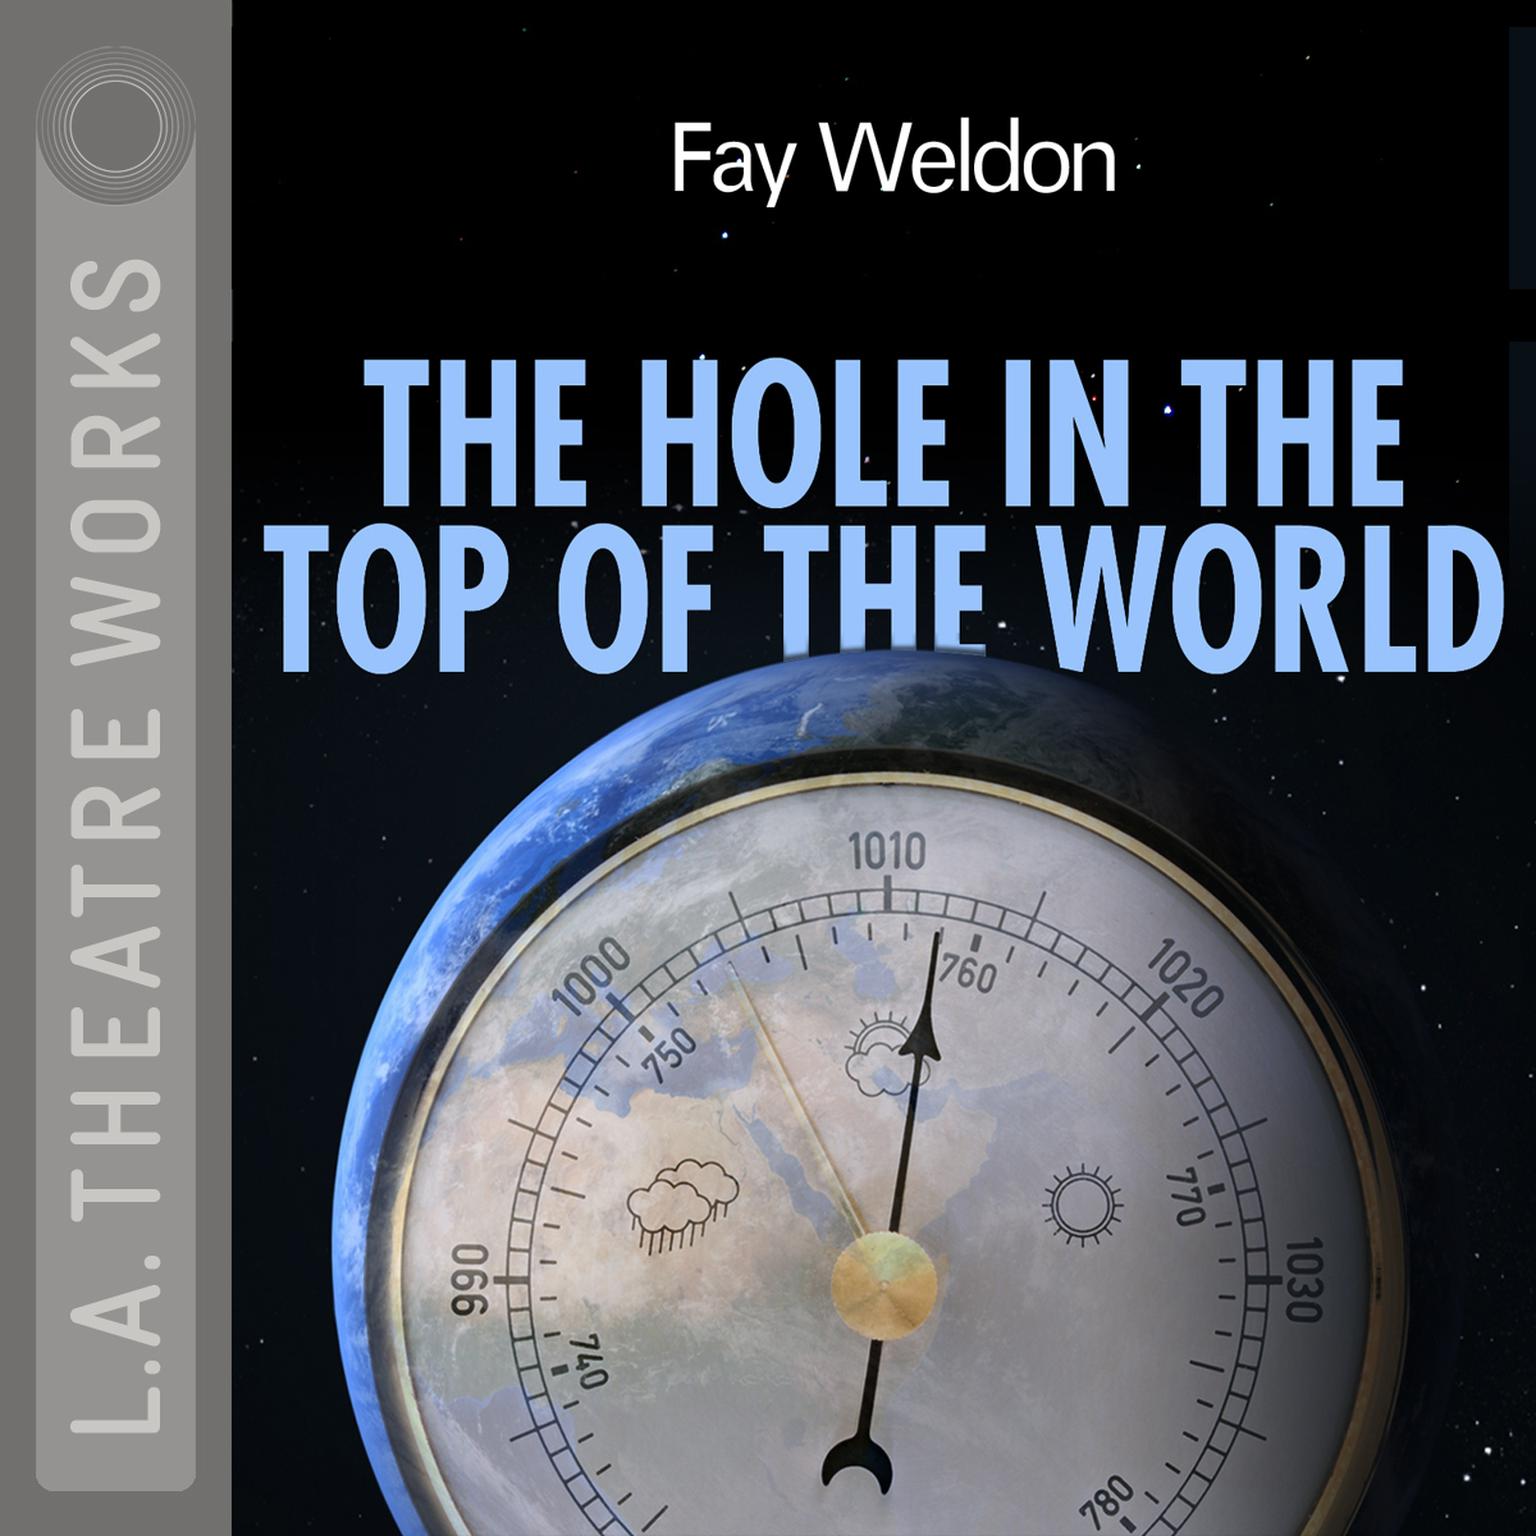 The Hole in the Top of the World Audiobook, by Fay Weldon